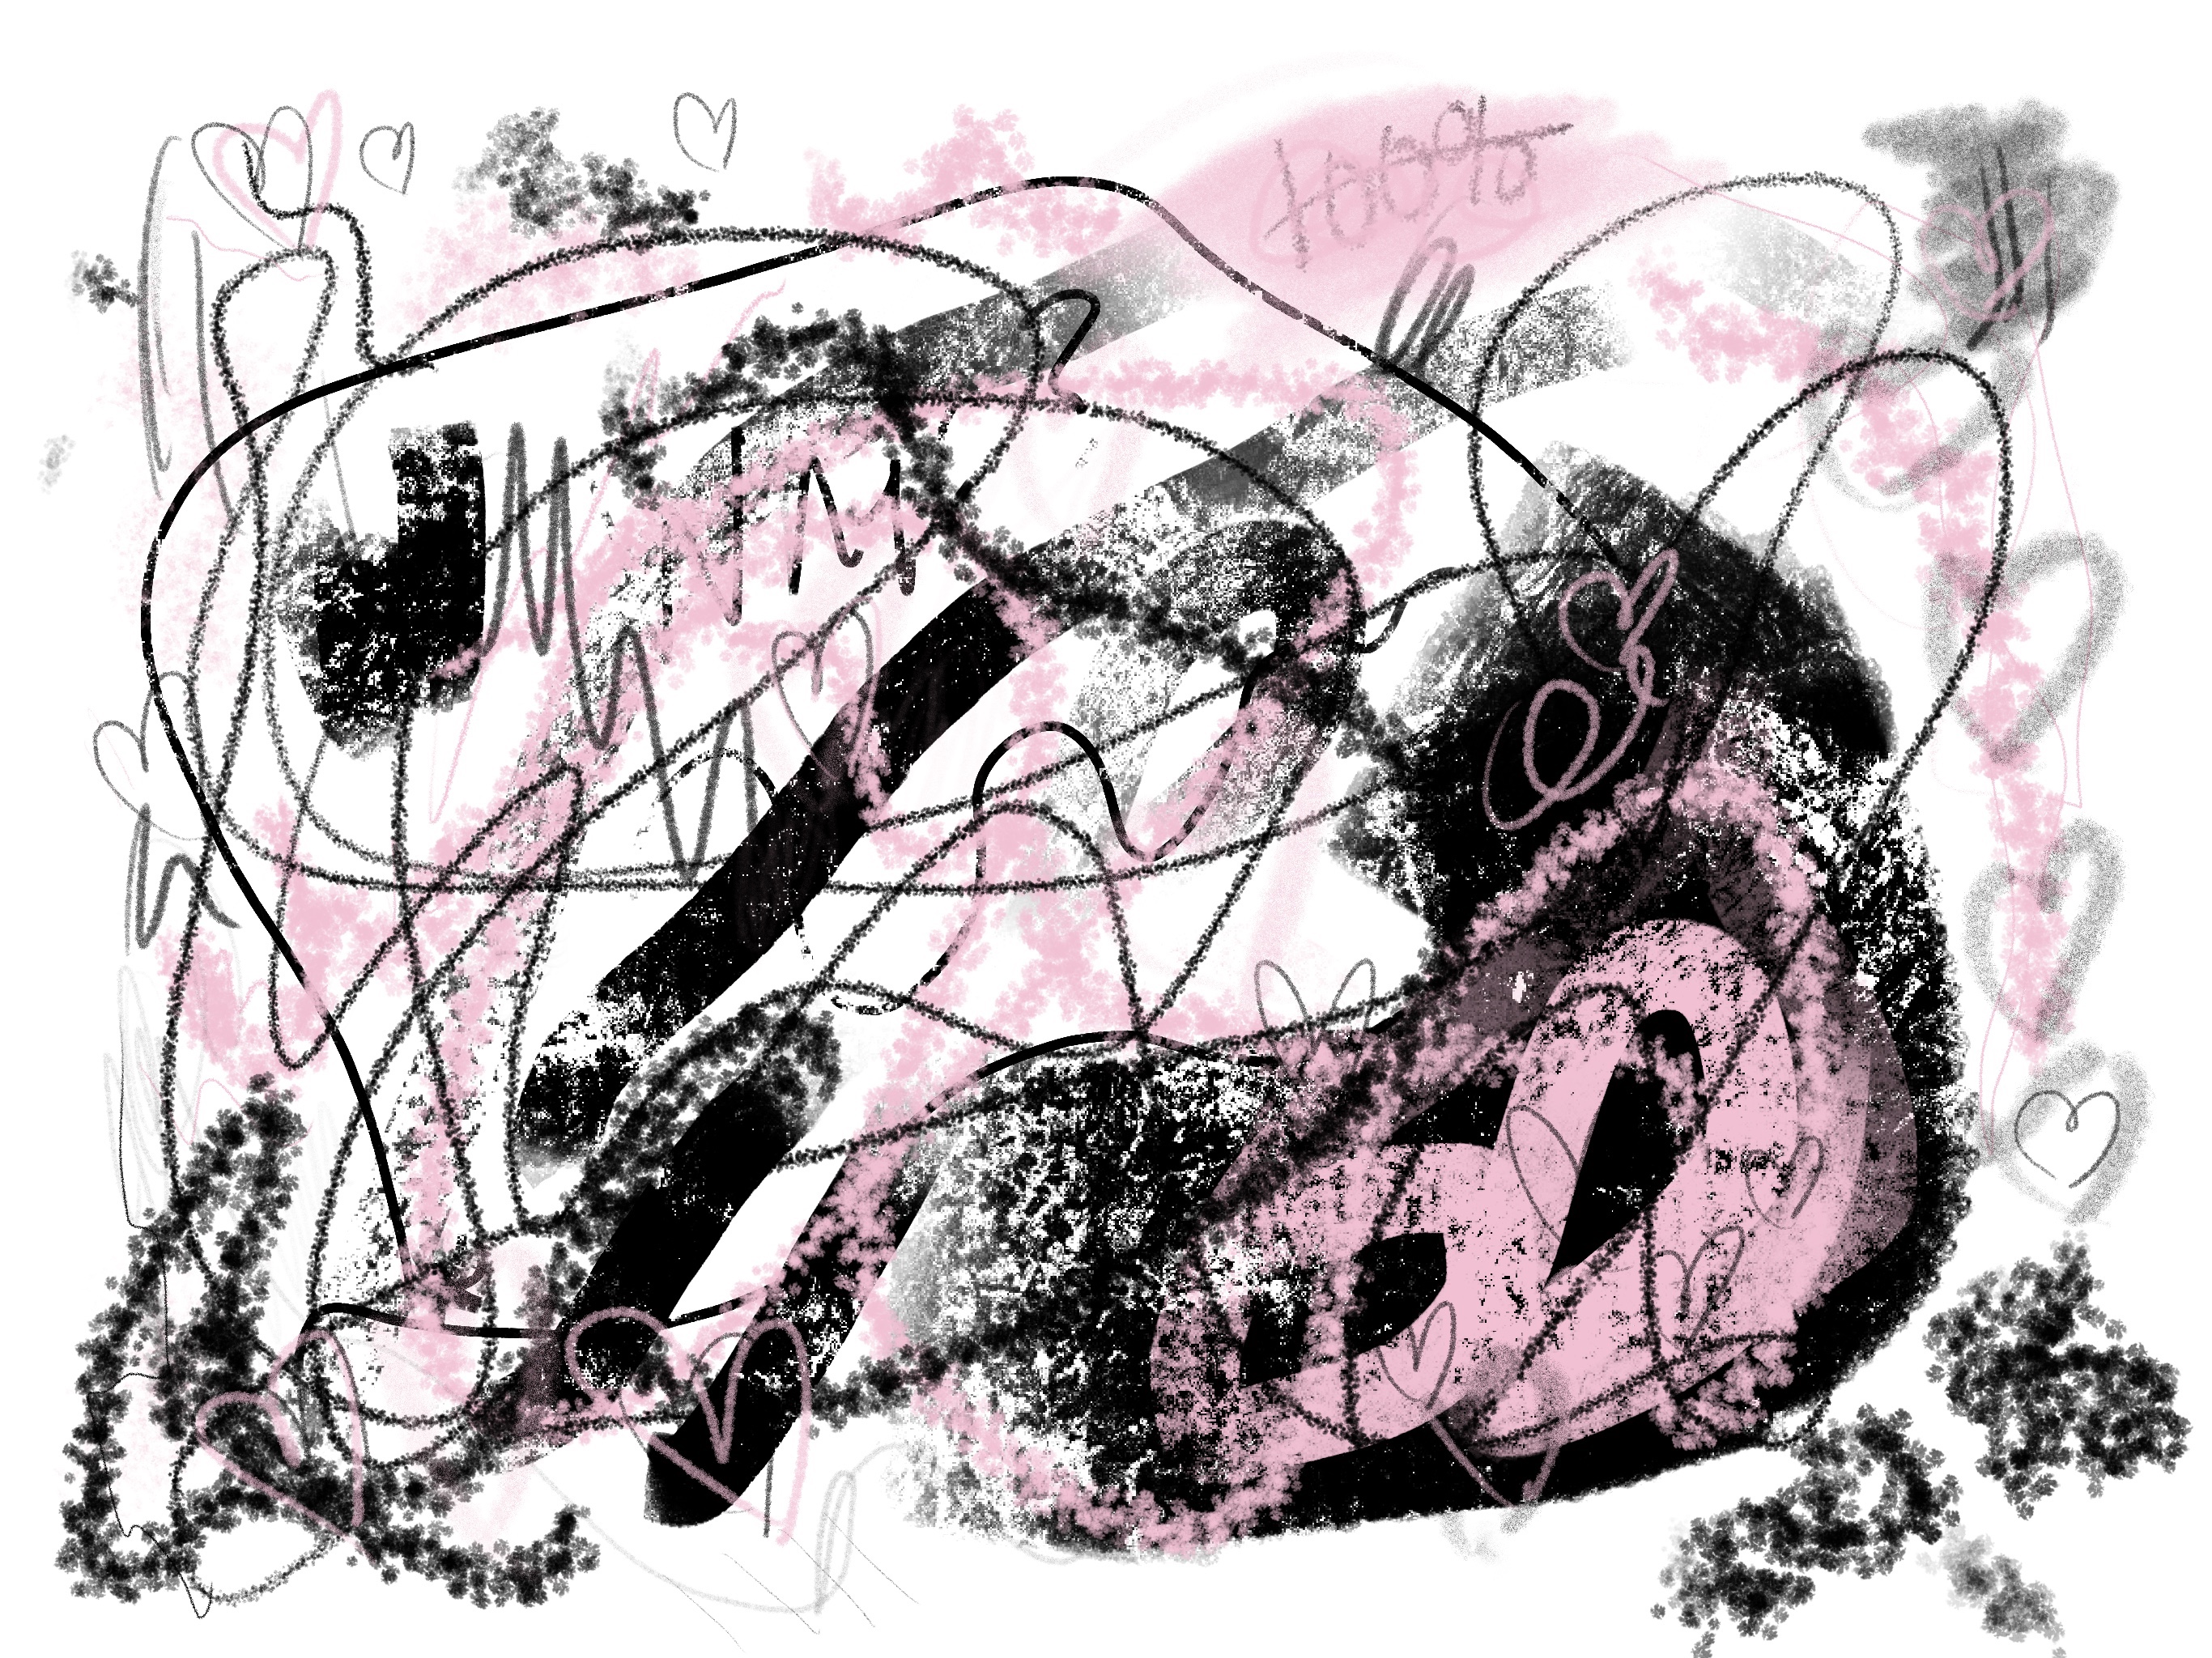 abstract digital art in a pink and black charcoal overlapping scribbles of various saturation and thickness.